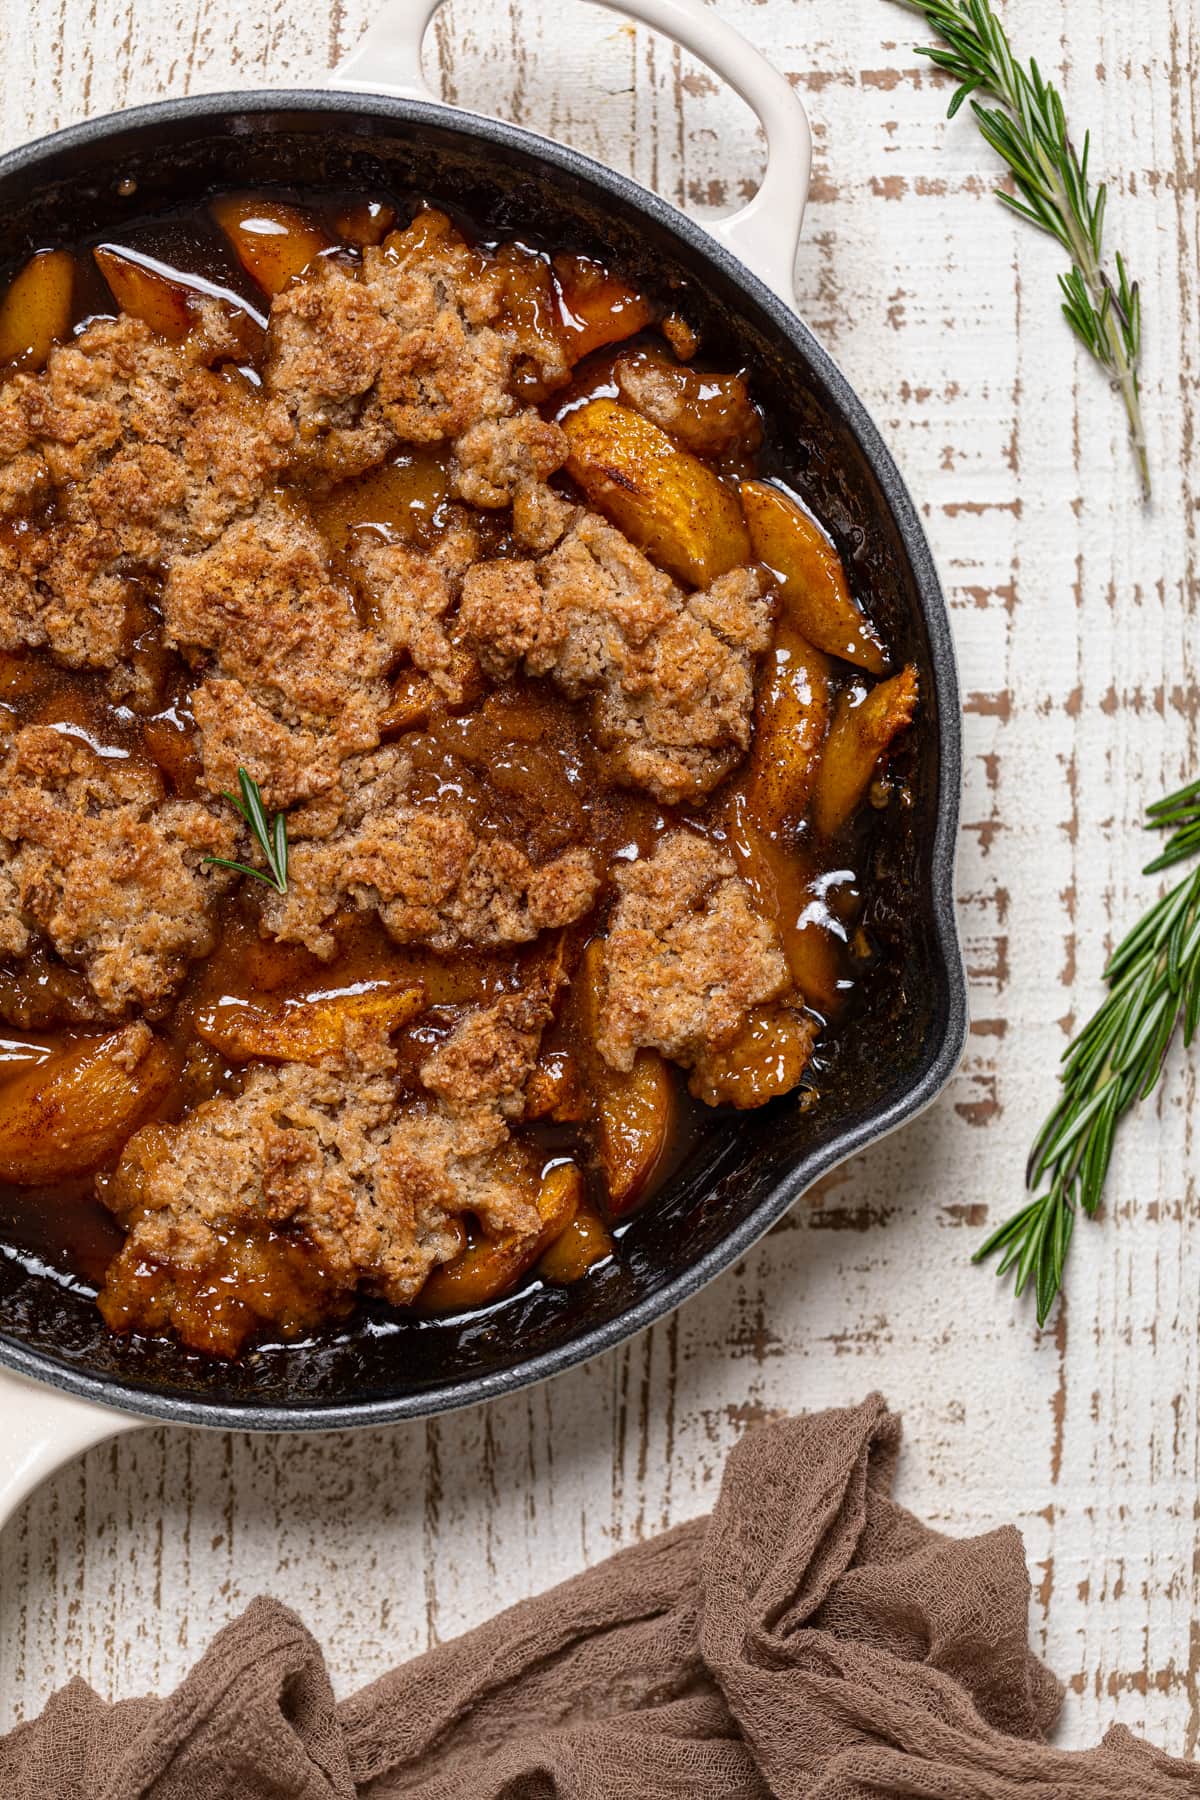 Vegan Southern Peach Cobbler on a table with sprigs of rosemary.